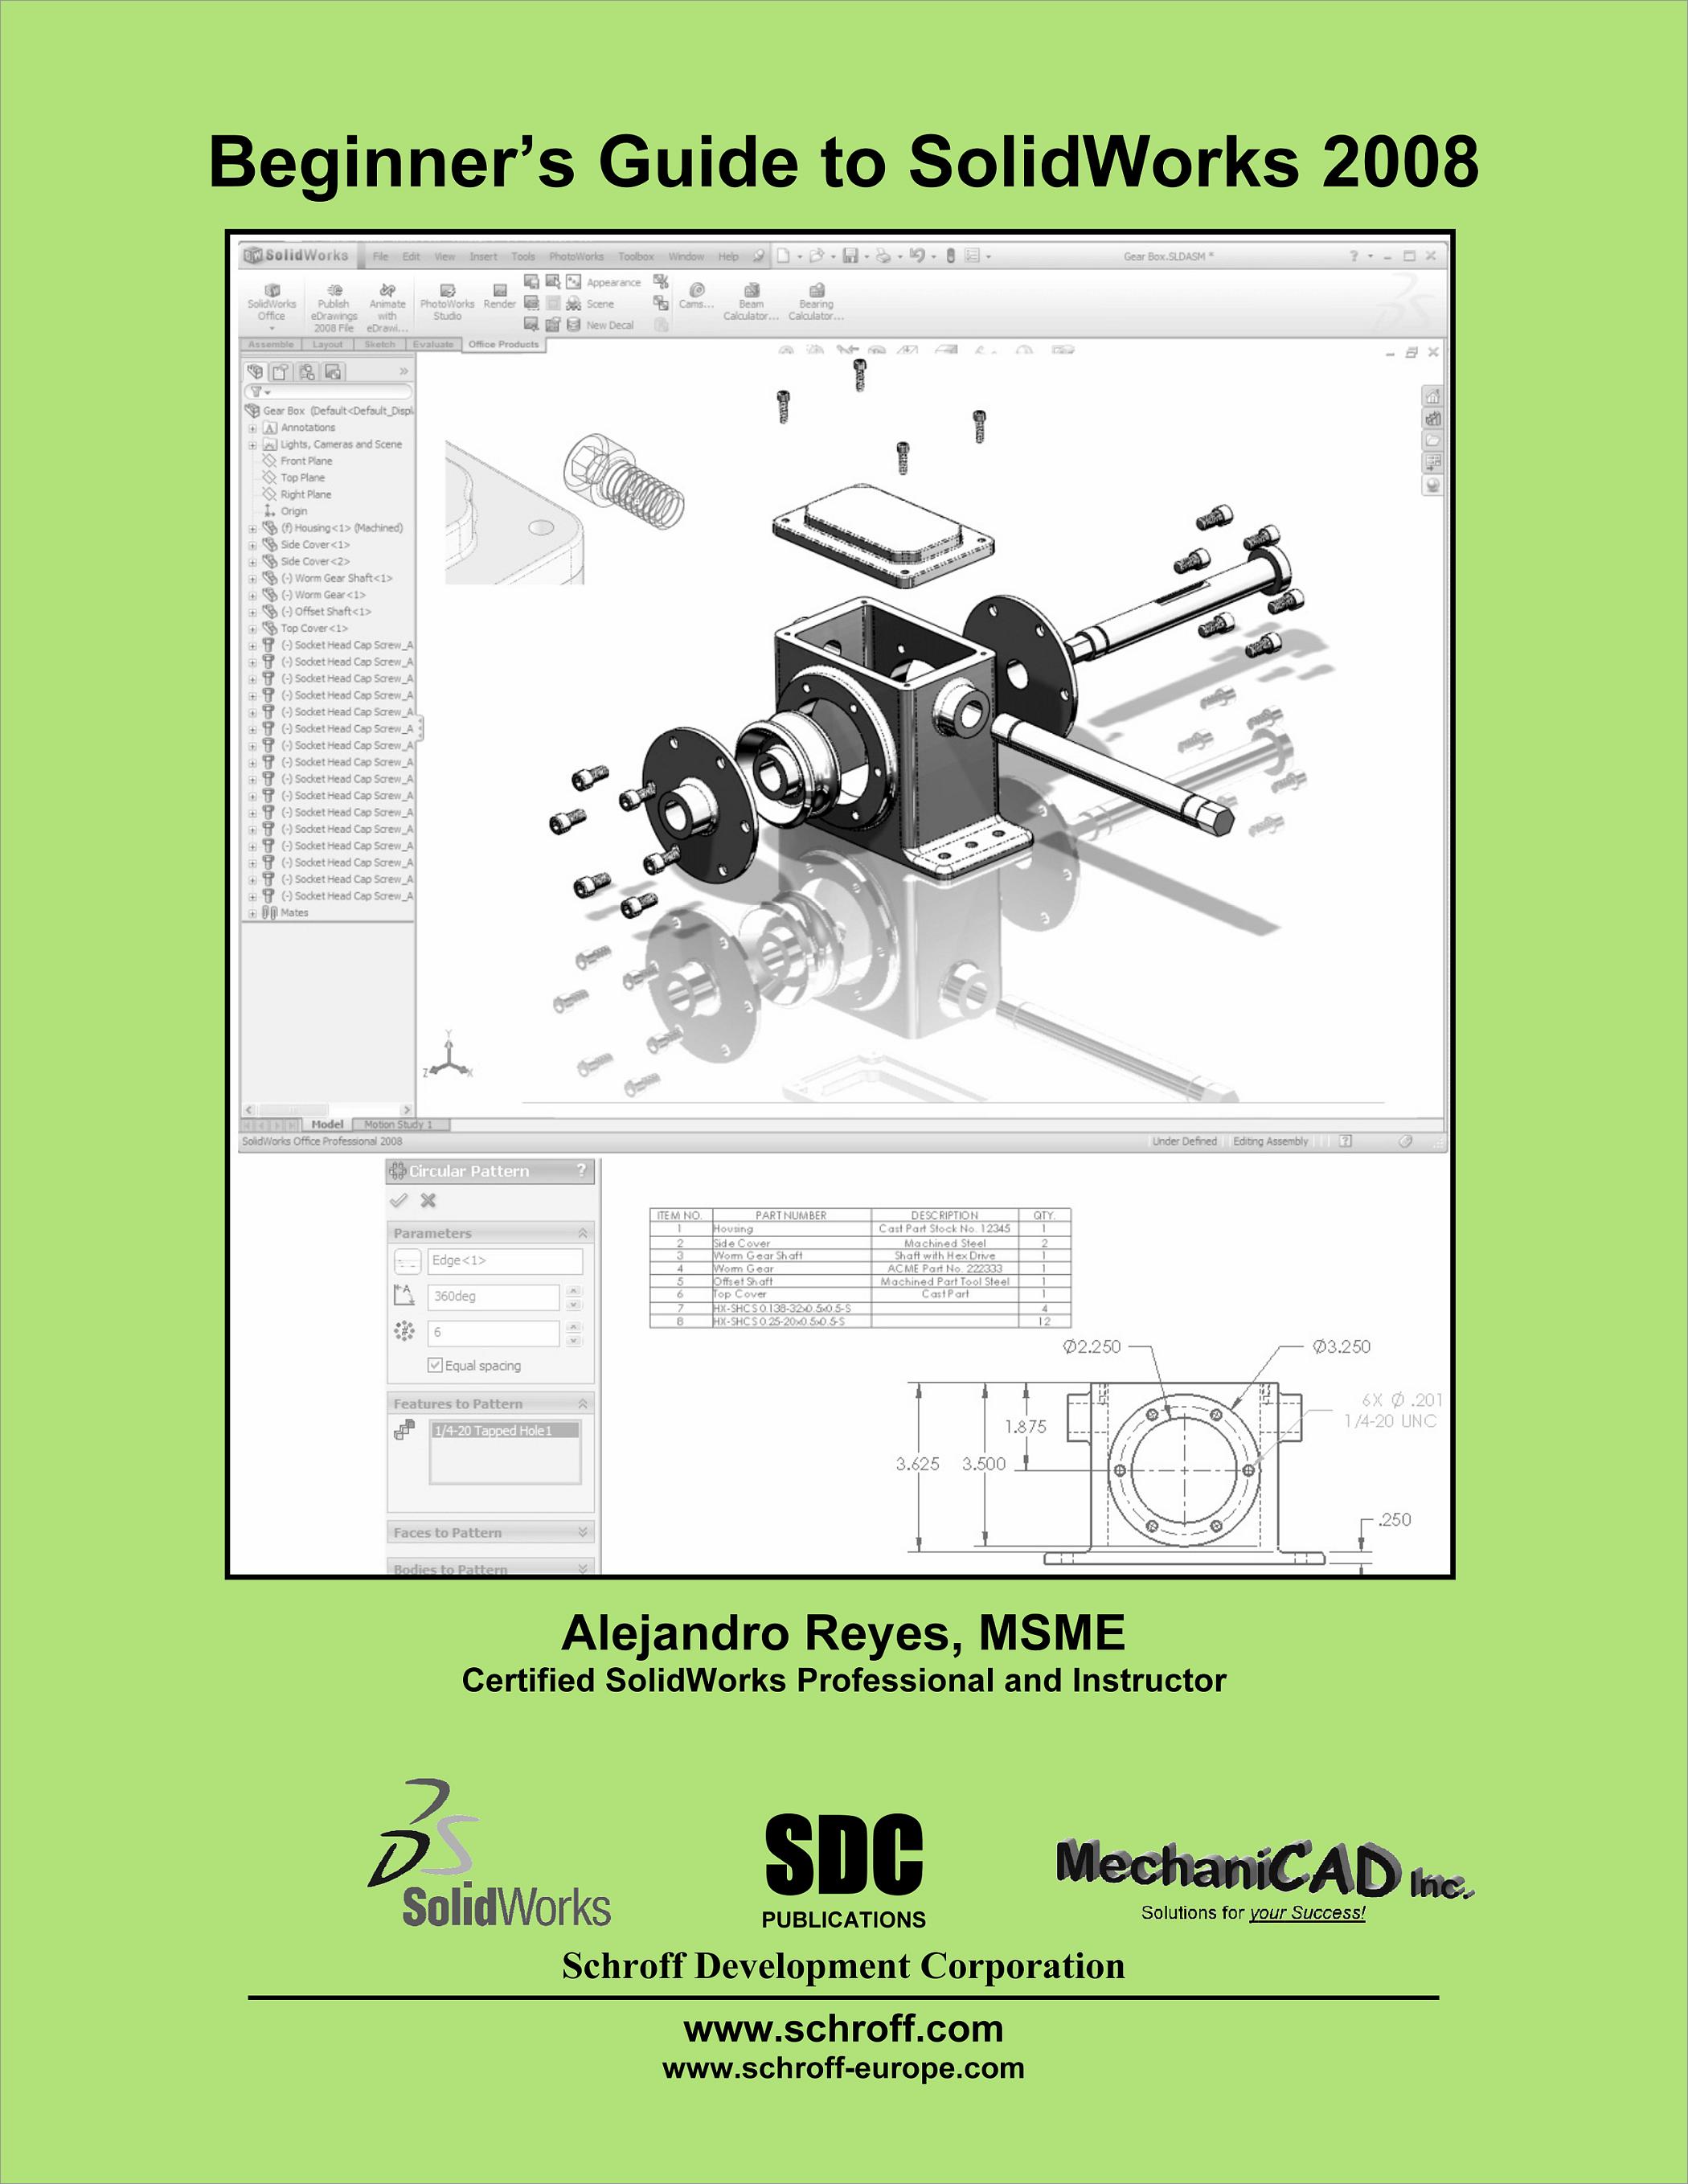 solidworks 2008 free download